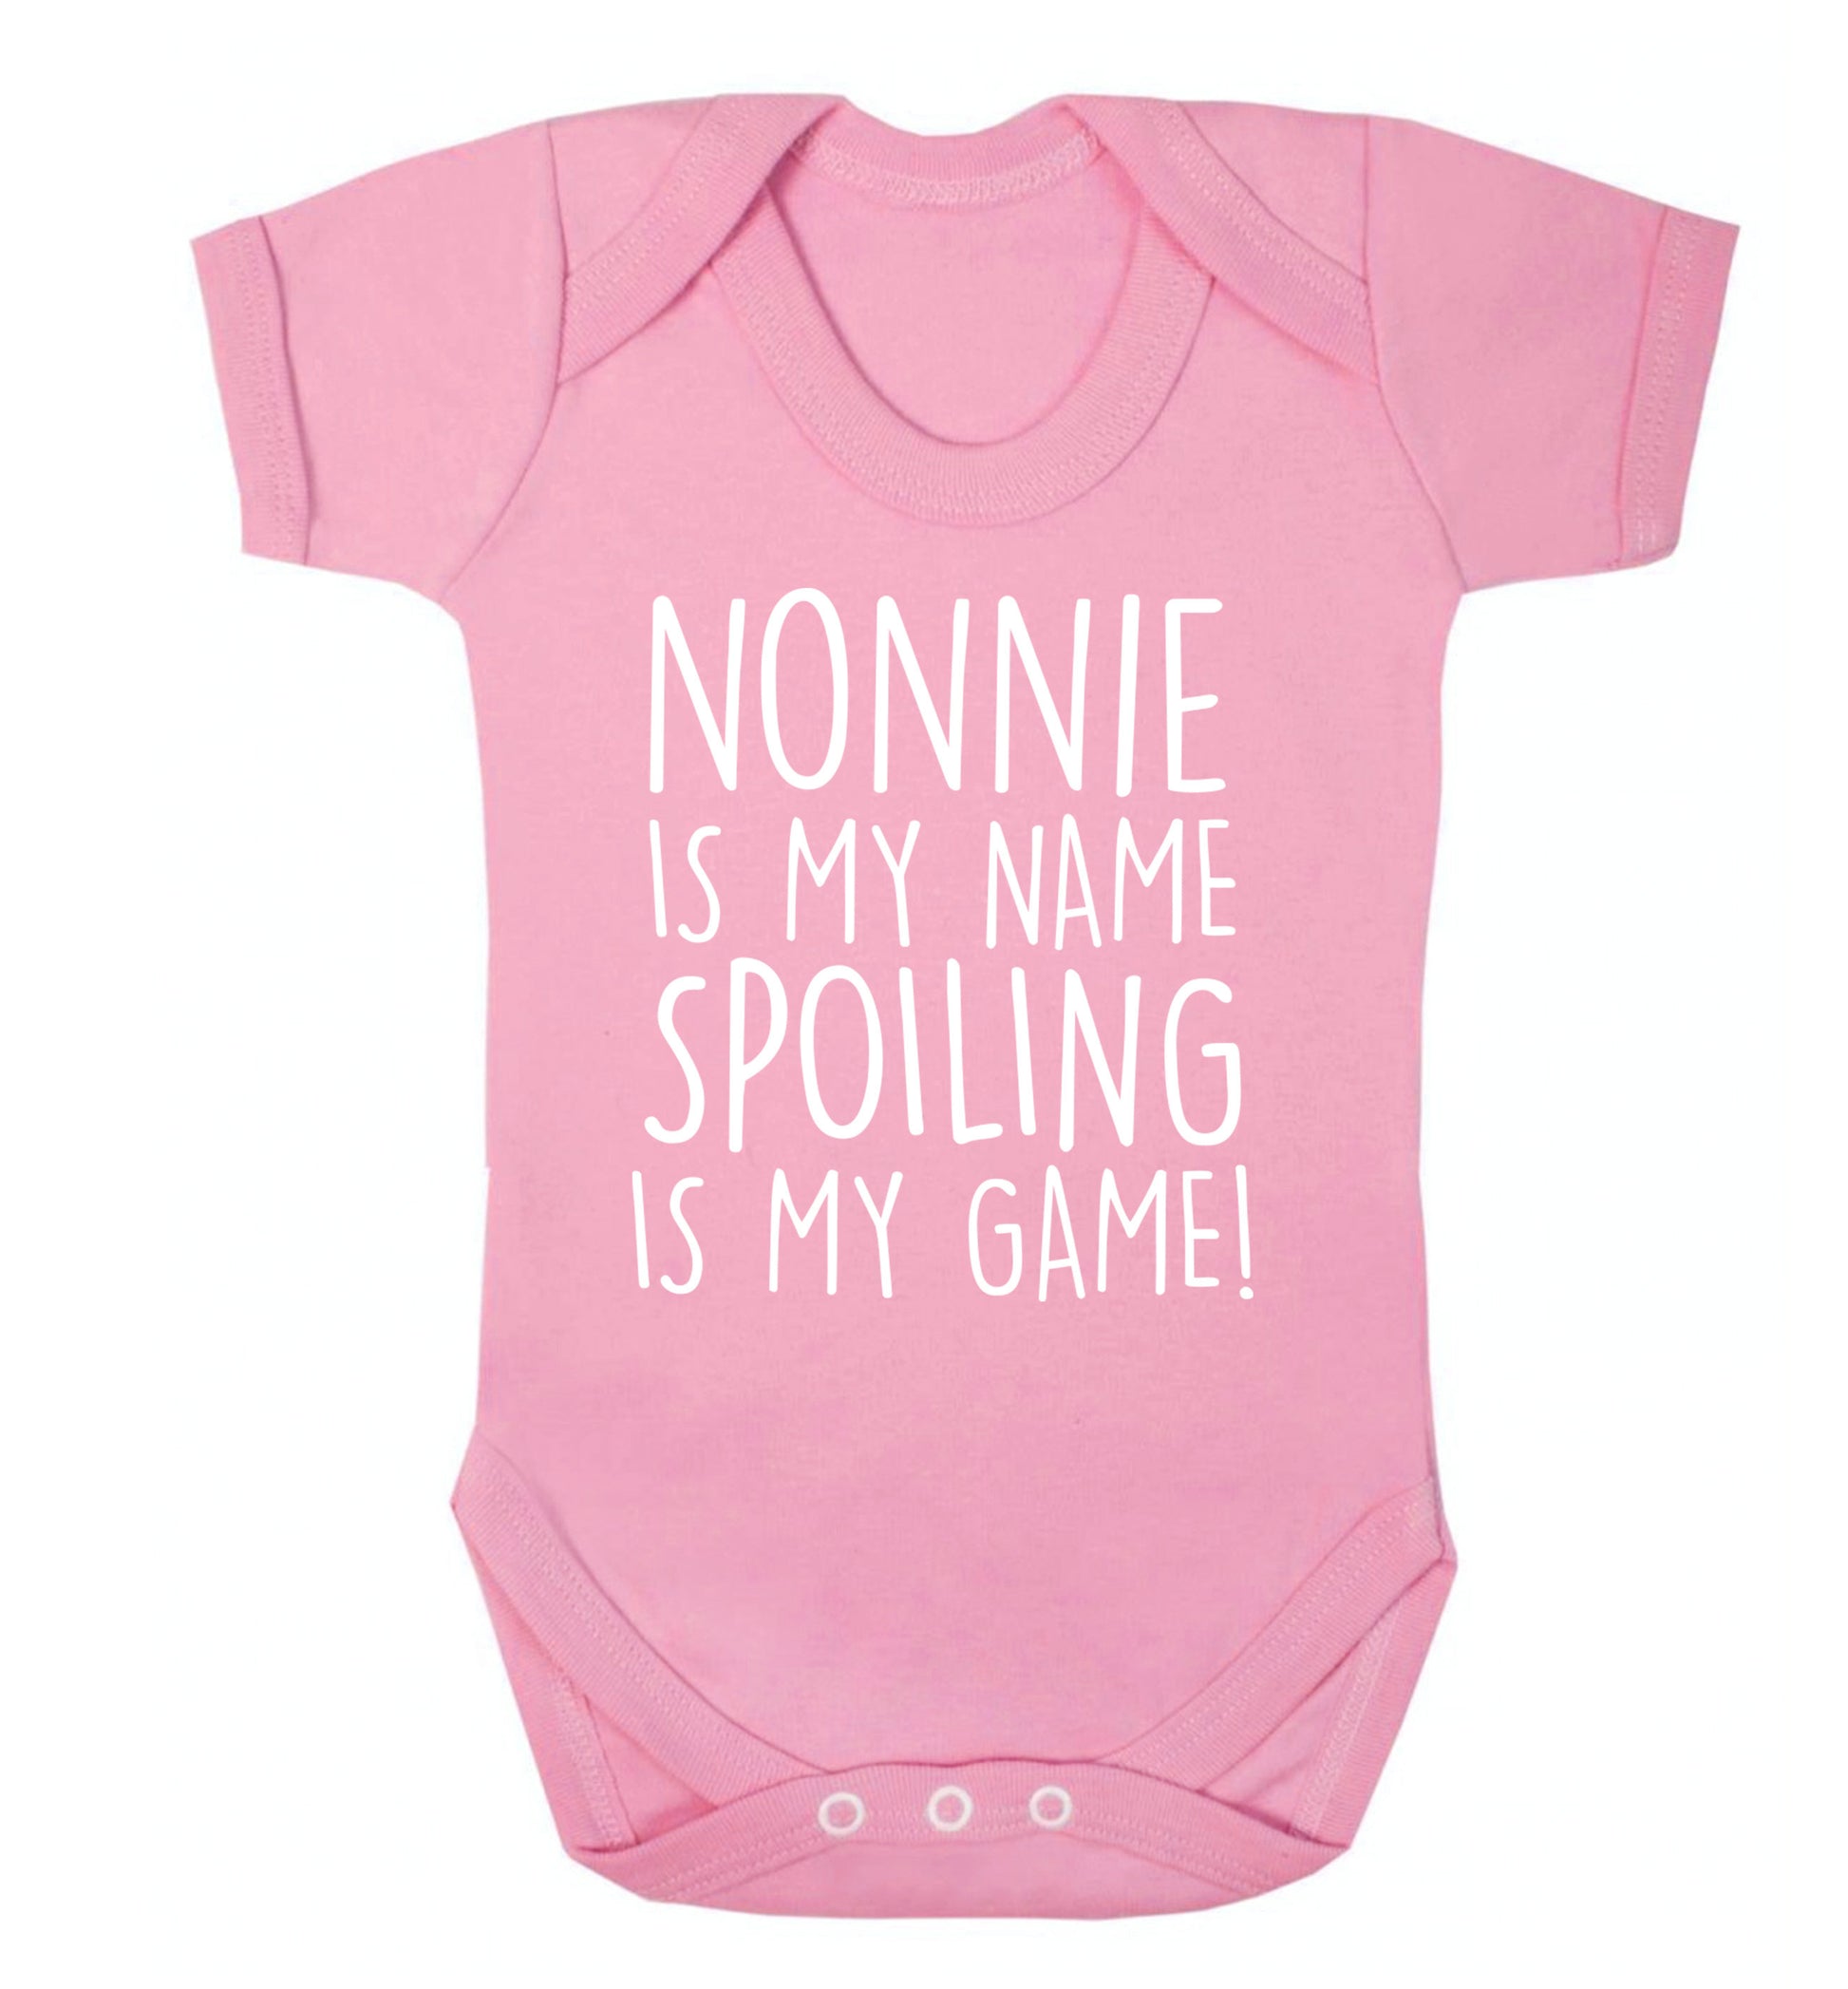 Nonnie is my name, spoiling is my game Baby Vest pale pink 18-24 months